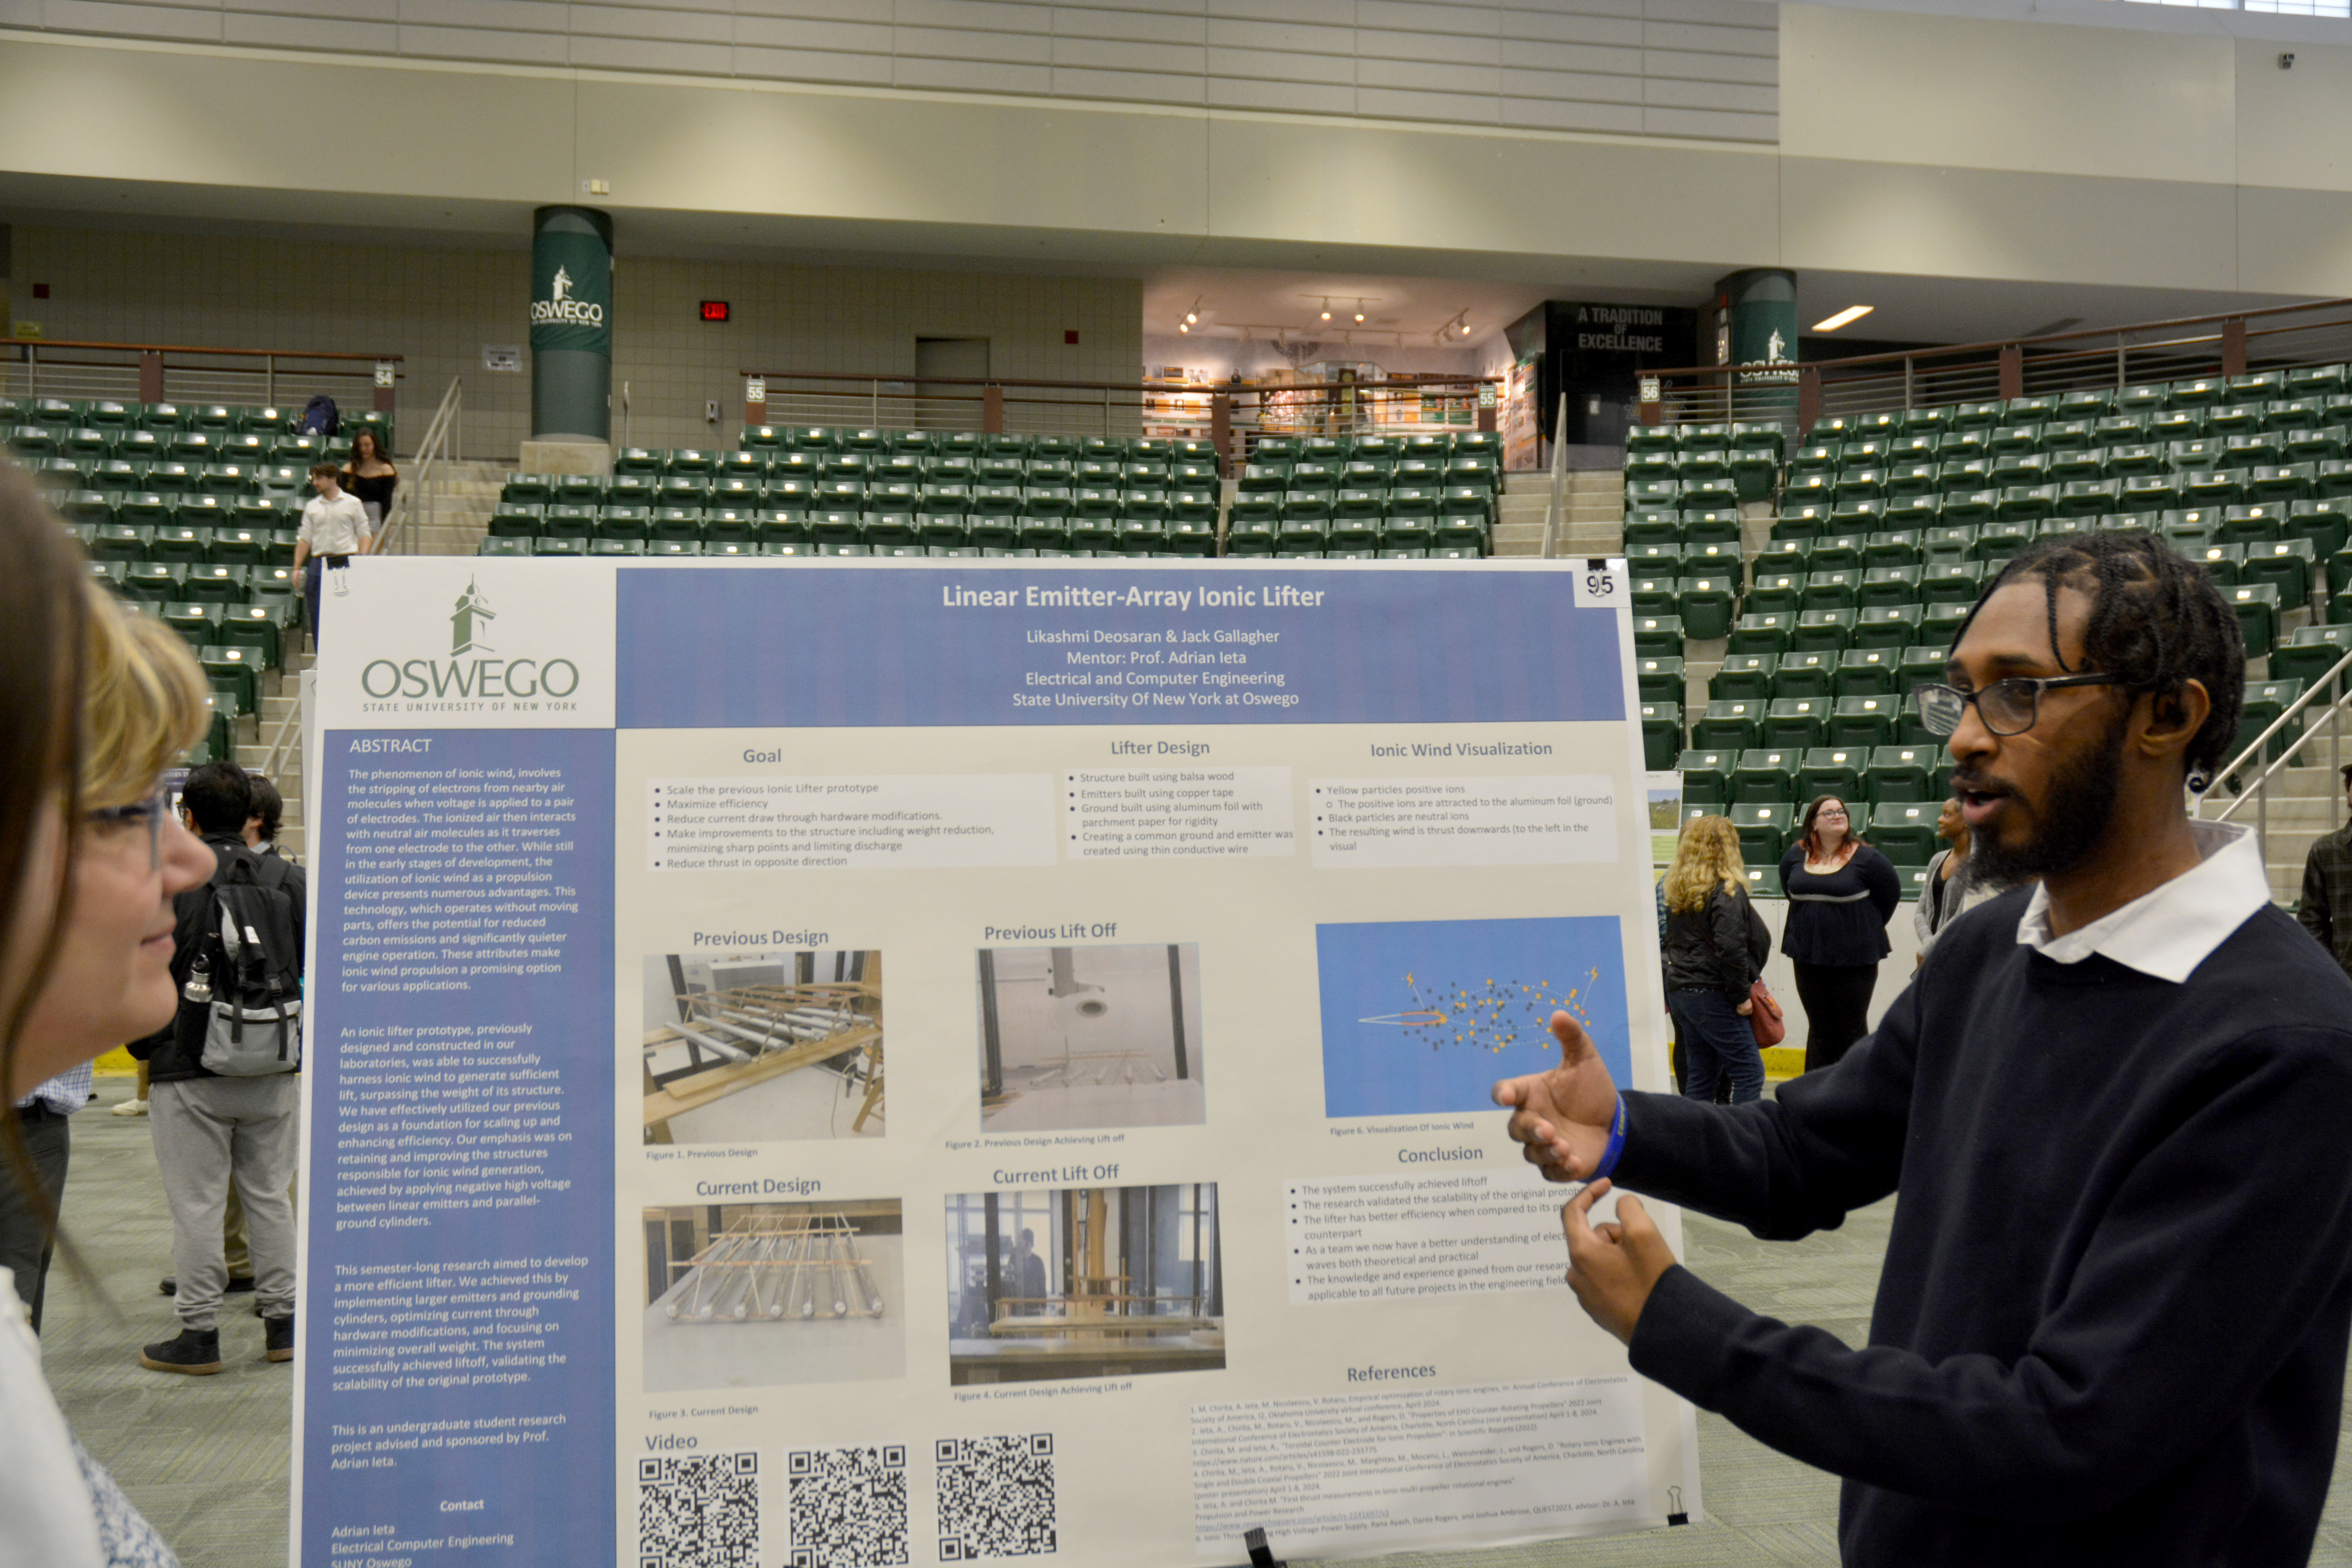 Electrical and computer engineering major Likashmi Deosaran presents on the “Linear Emitter-Array Ionic Lifter” project, co-authored by fellow student Jack Gallagher. The project is part of Adrian Ieta’s groundbreaking research on ionic propulsion technology, which recently received a federal patent.